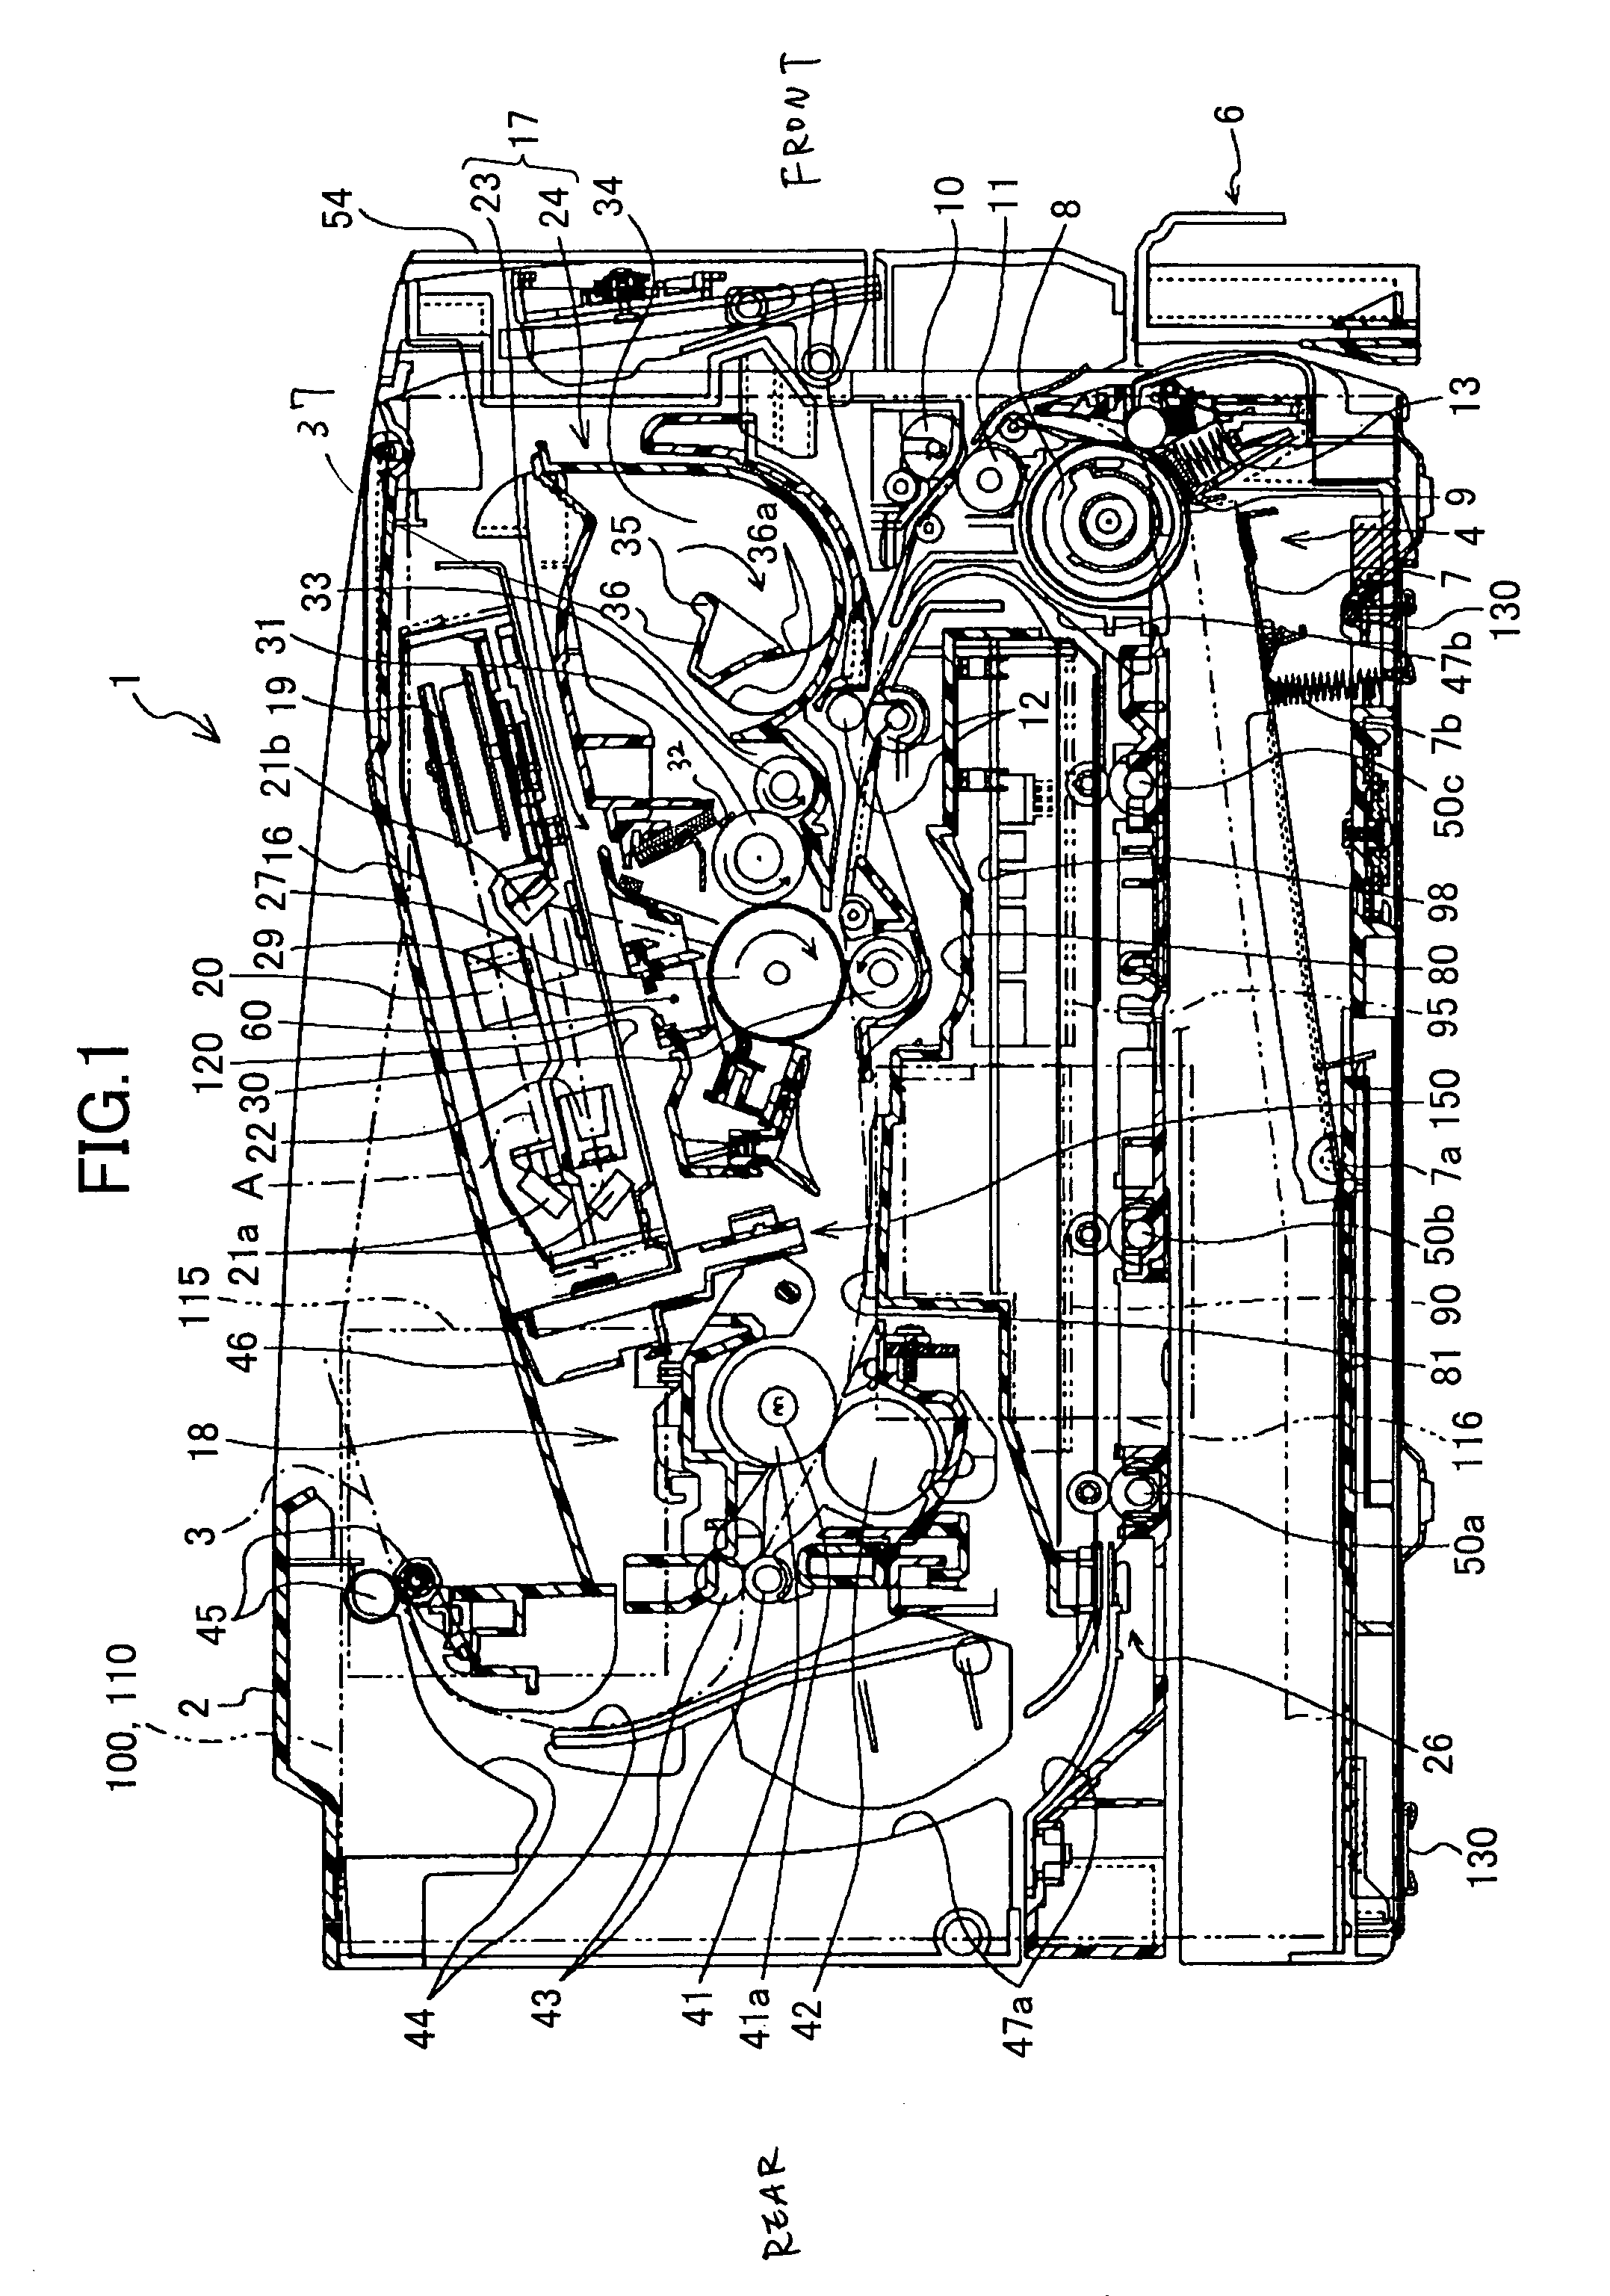 Exhaust system of image forming device